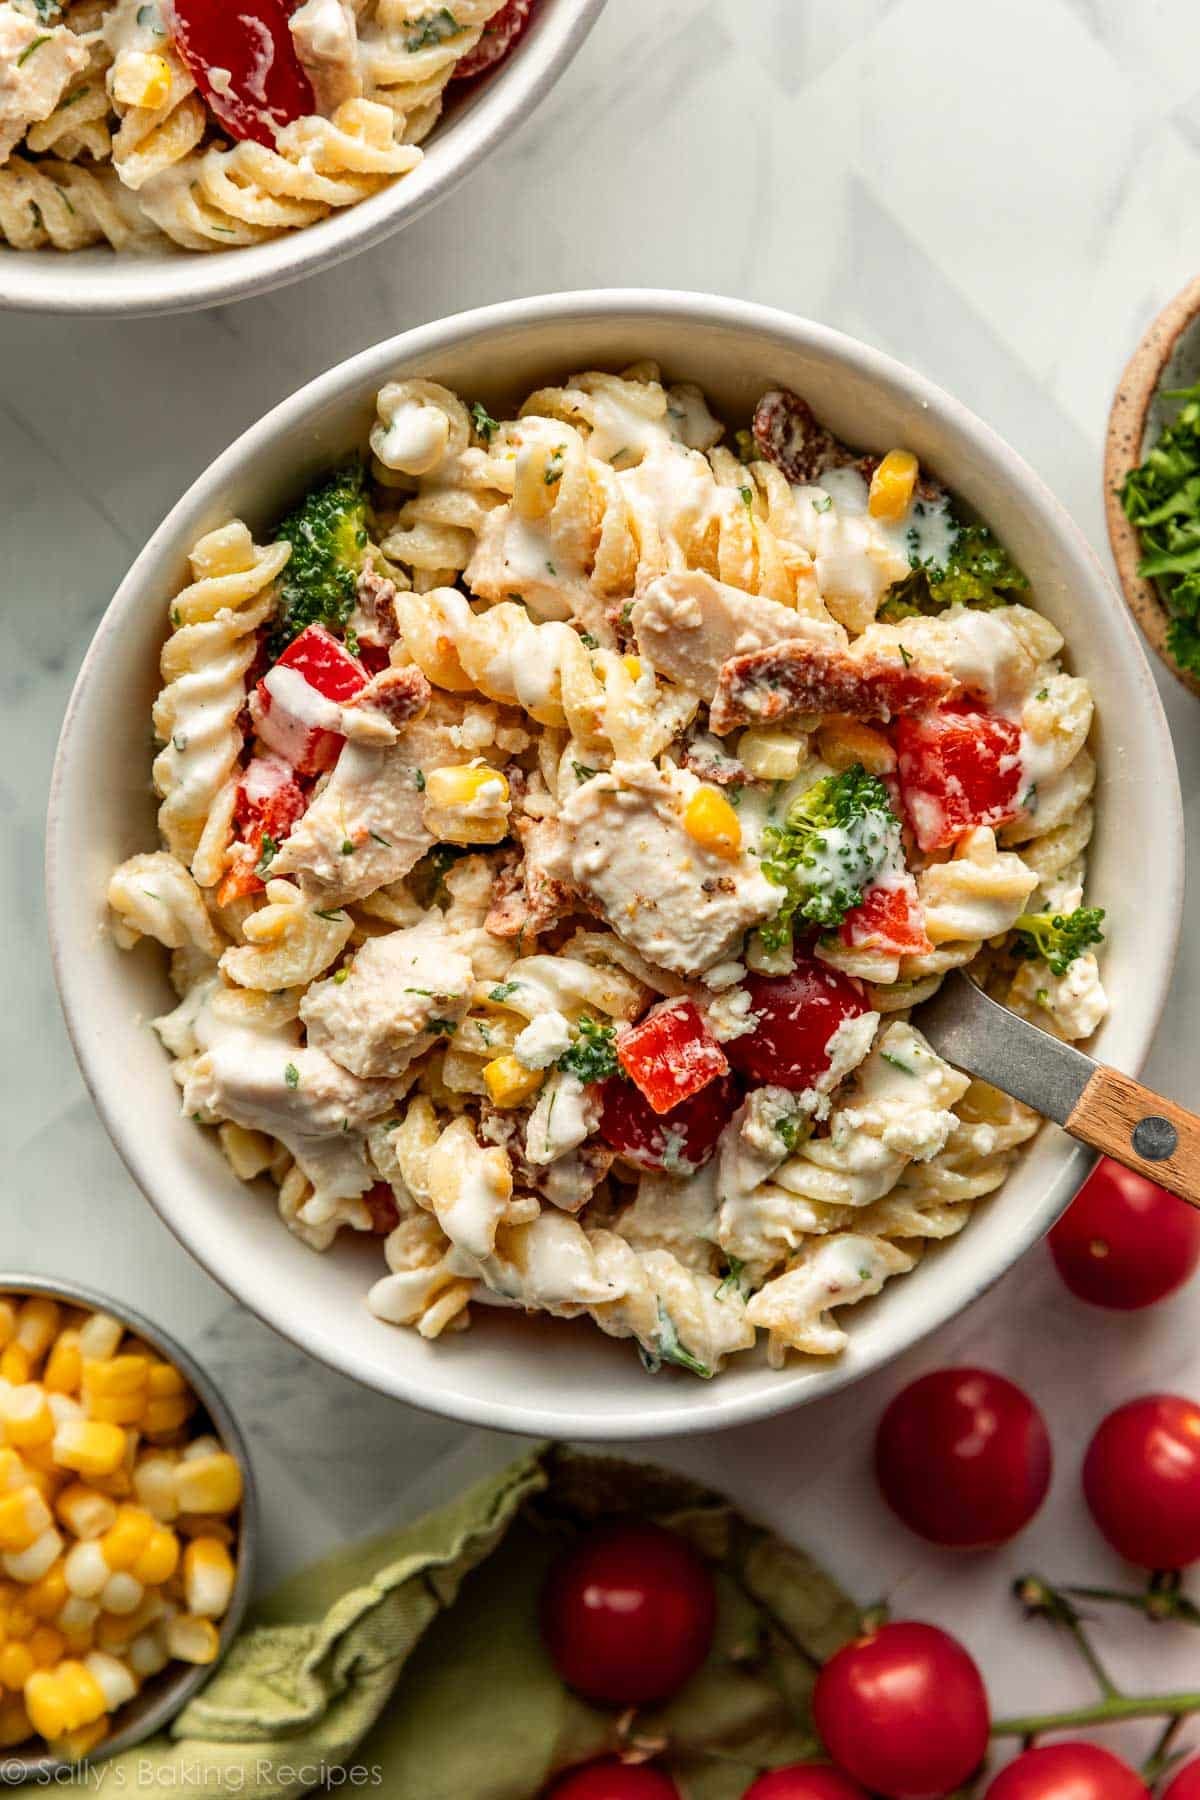 serving bowl of creamy chicken pasta salad with broccoli and red bell peppers.